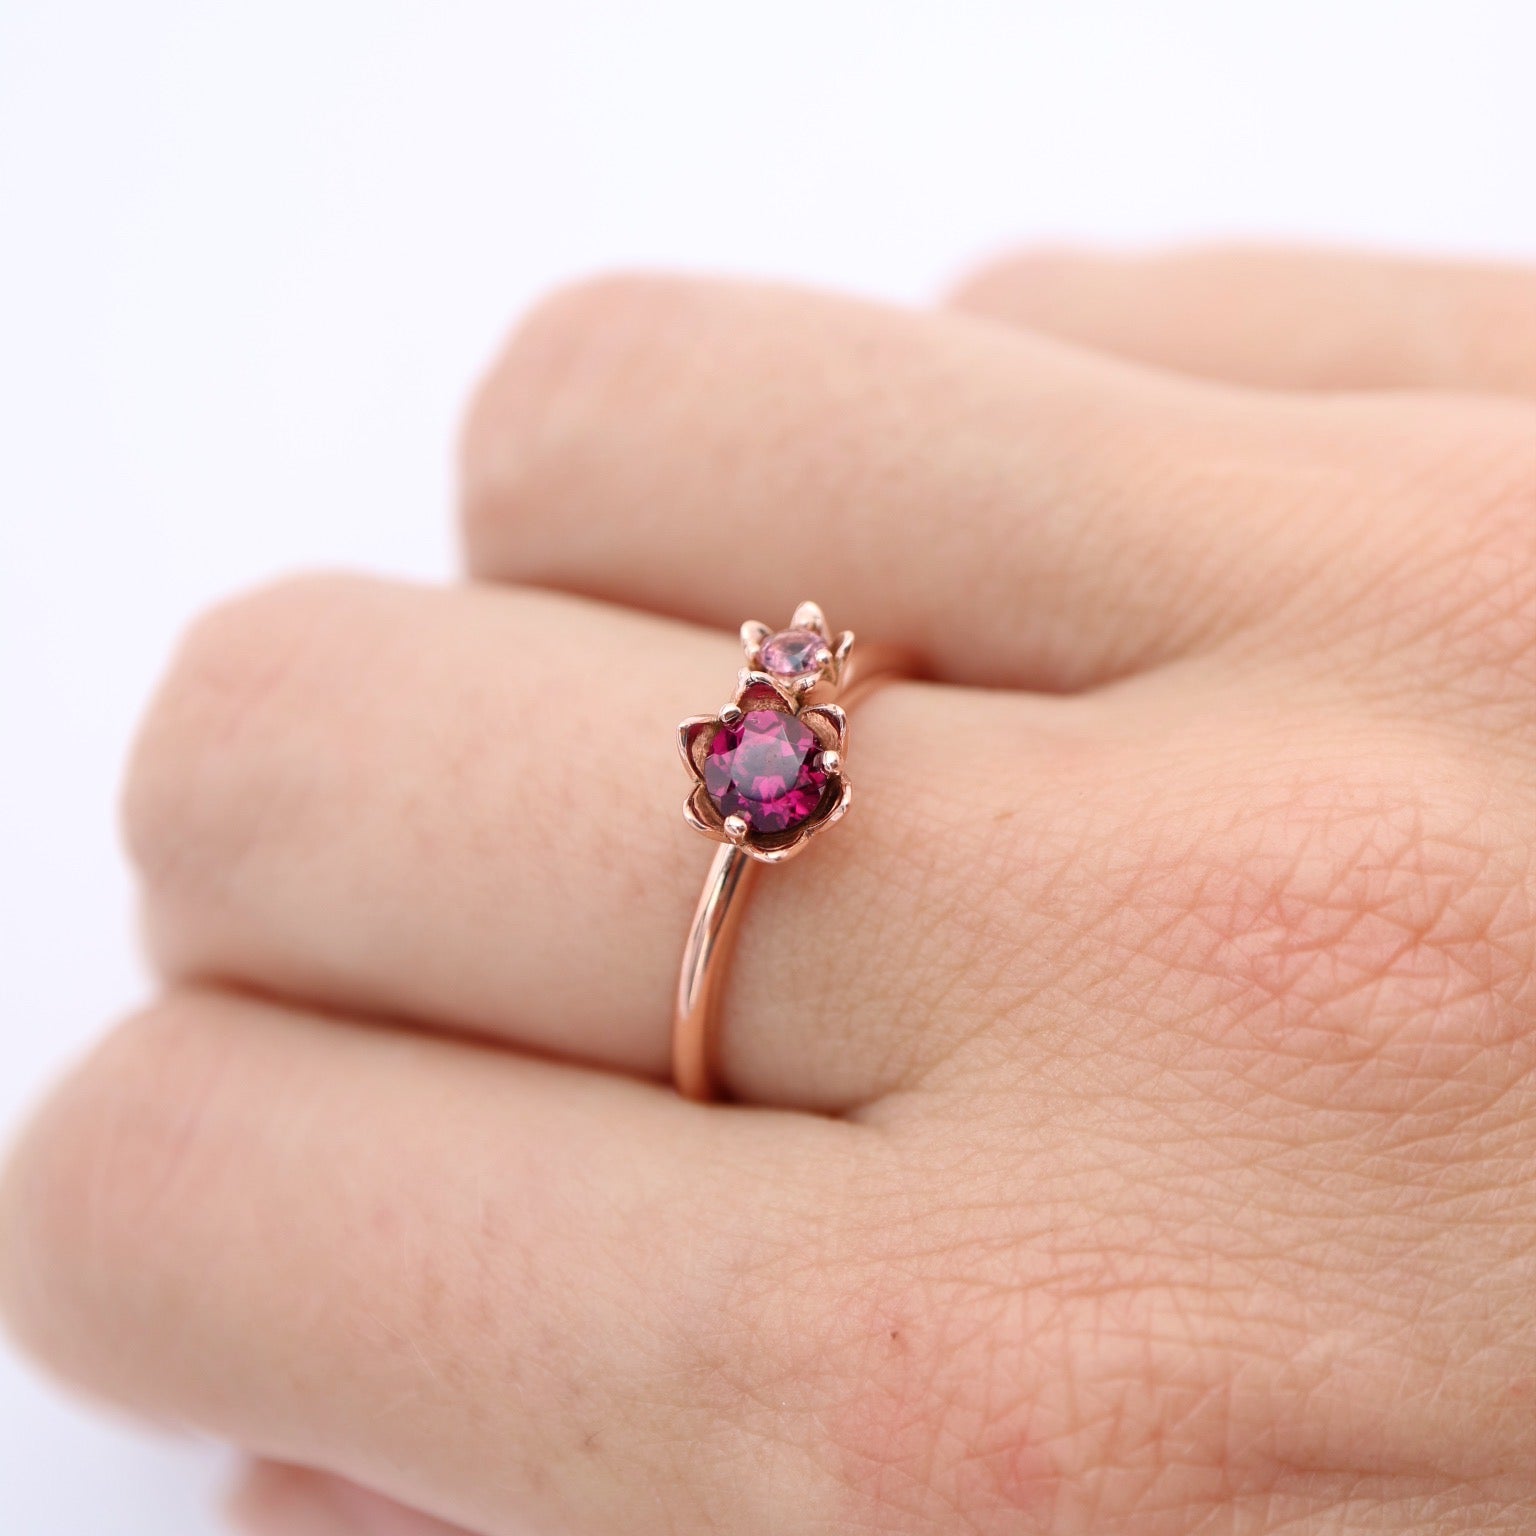 9kt rose gold ring with ruby coloured garnet